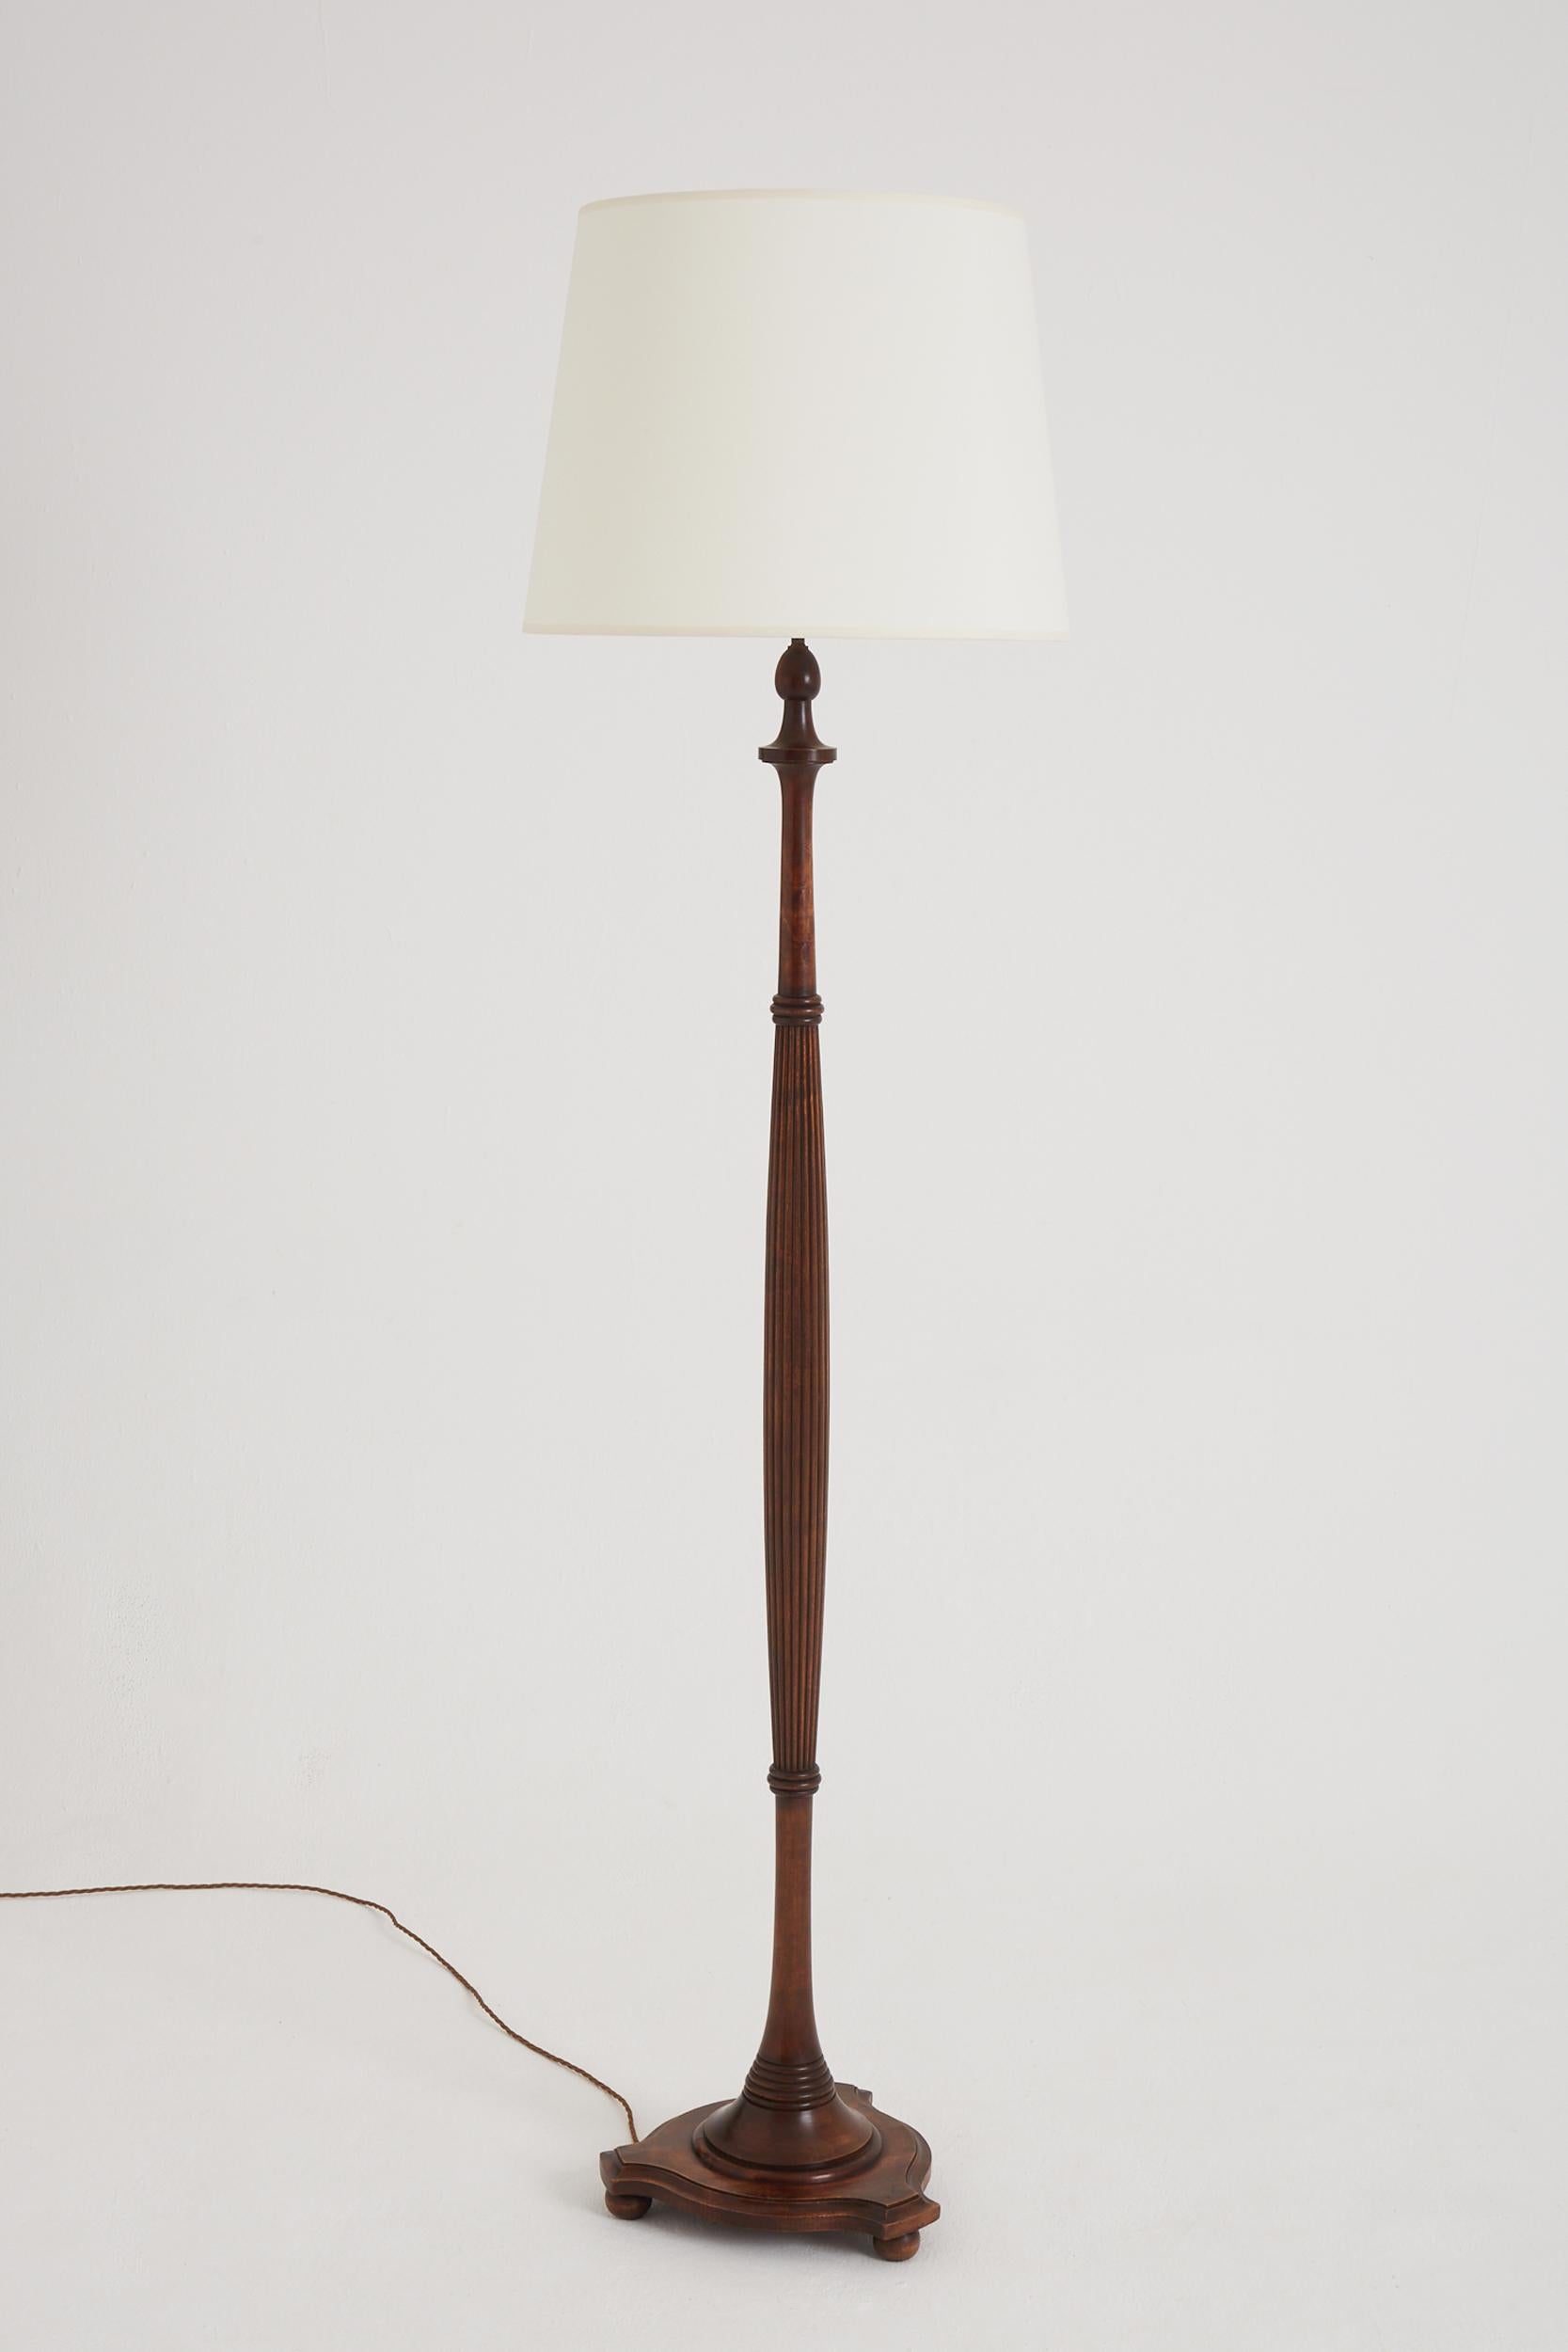 An Art Deco carved and stained oak floor lamp.
France, Circa 1930.
With the shade: 195 cm high by 50 cm diameter
Lamp base only: 163 cm high by 35 cm diameter
